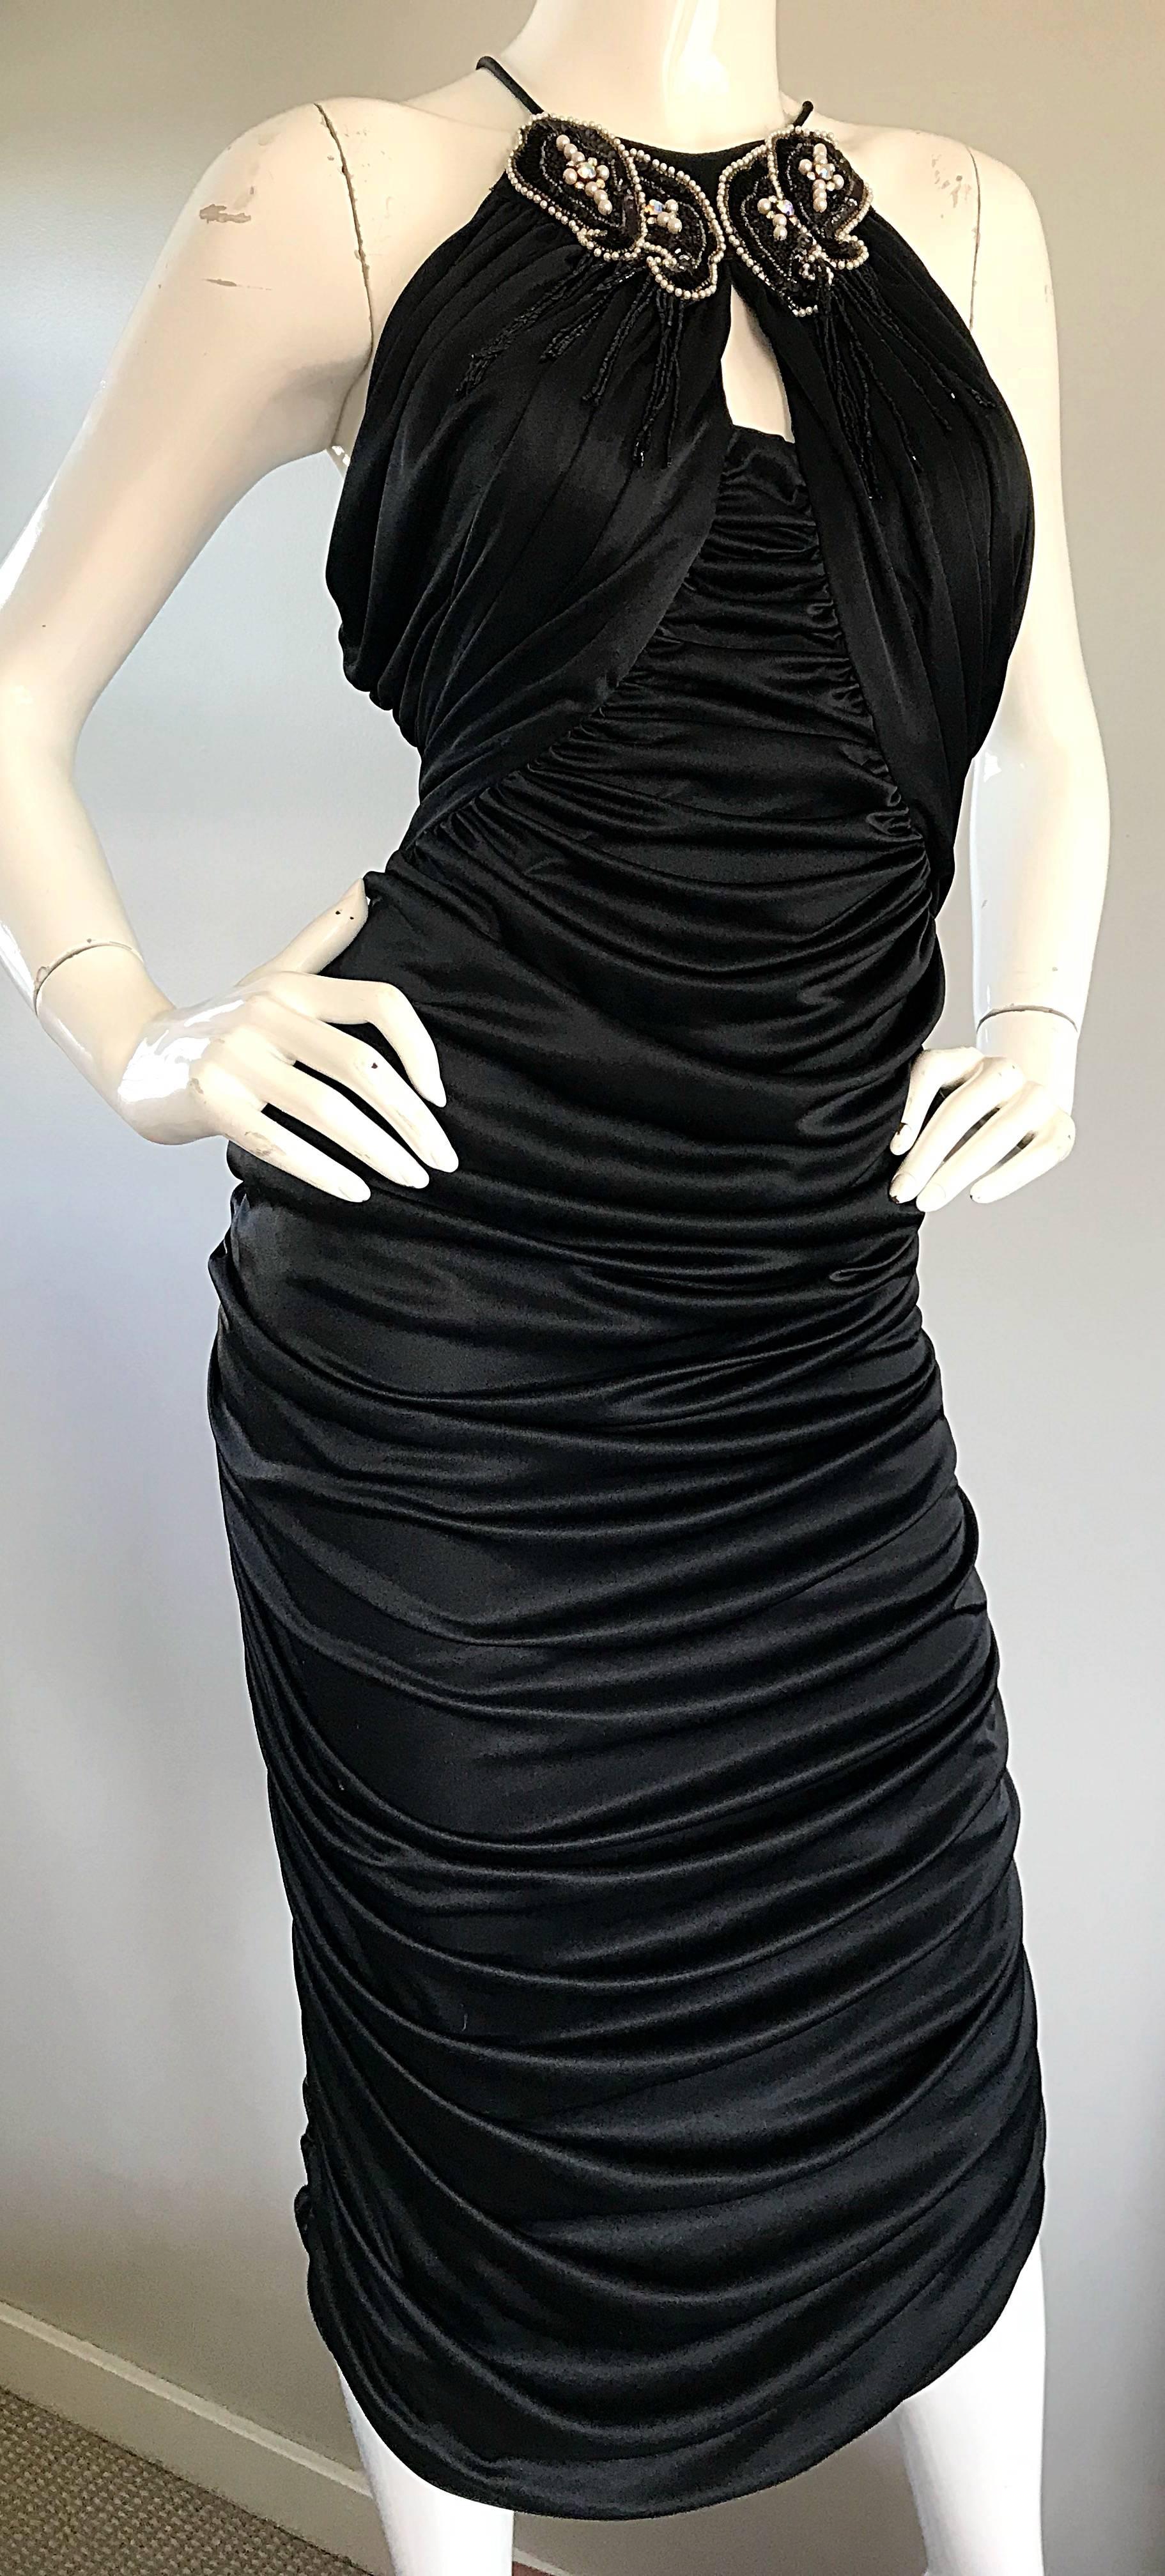 1980s Vintage Samir Black Beaded + Pearl + Rhinestone Sexy Ruched 80s Dress For Sale 2